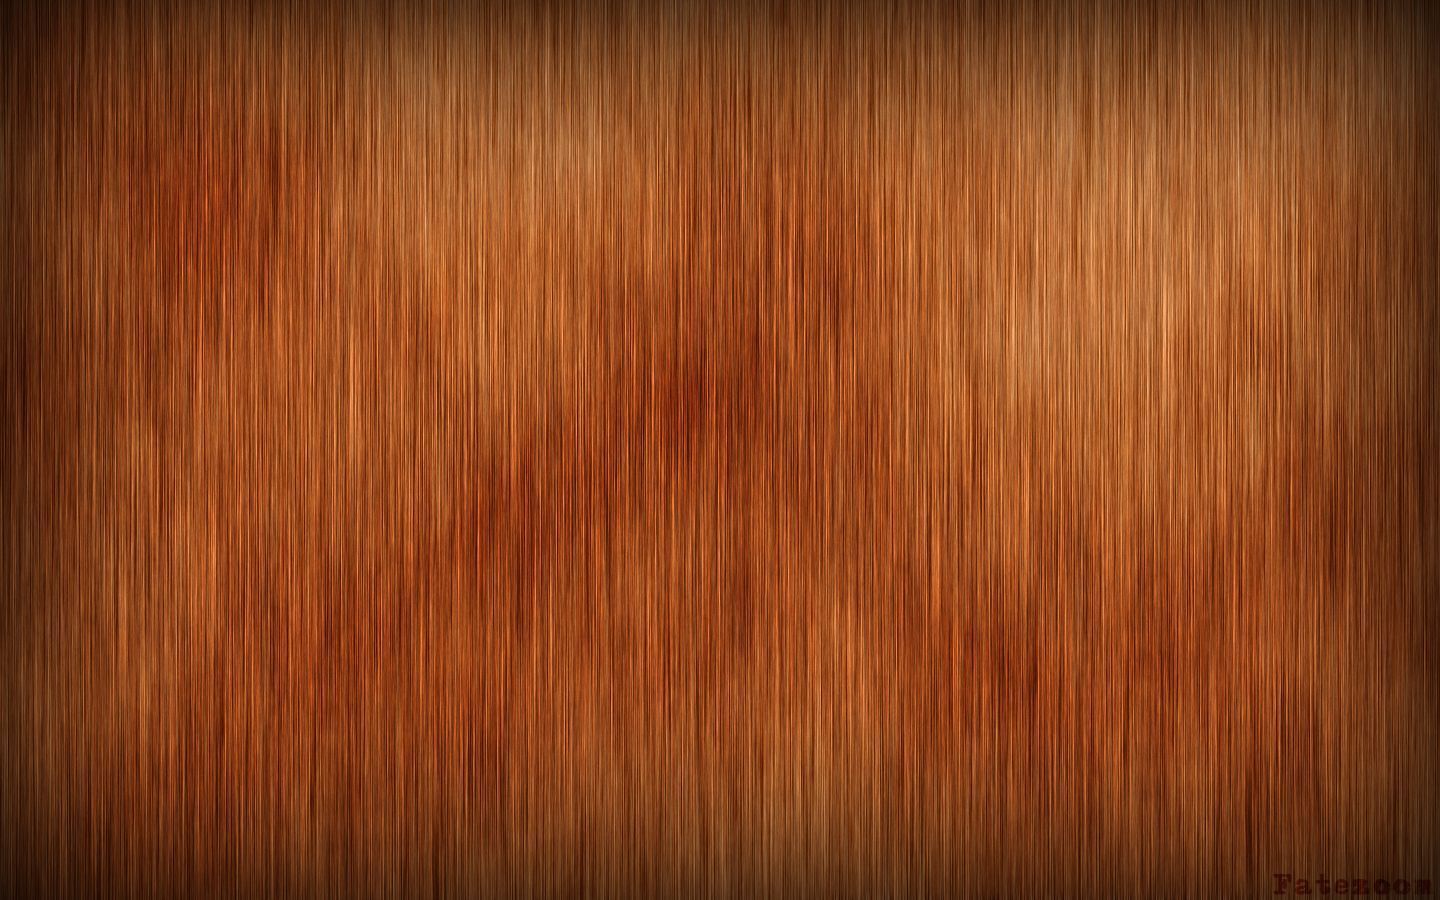 Gallery for - wooden texture wallpaper